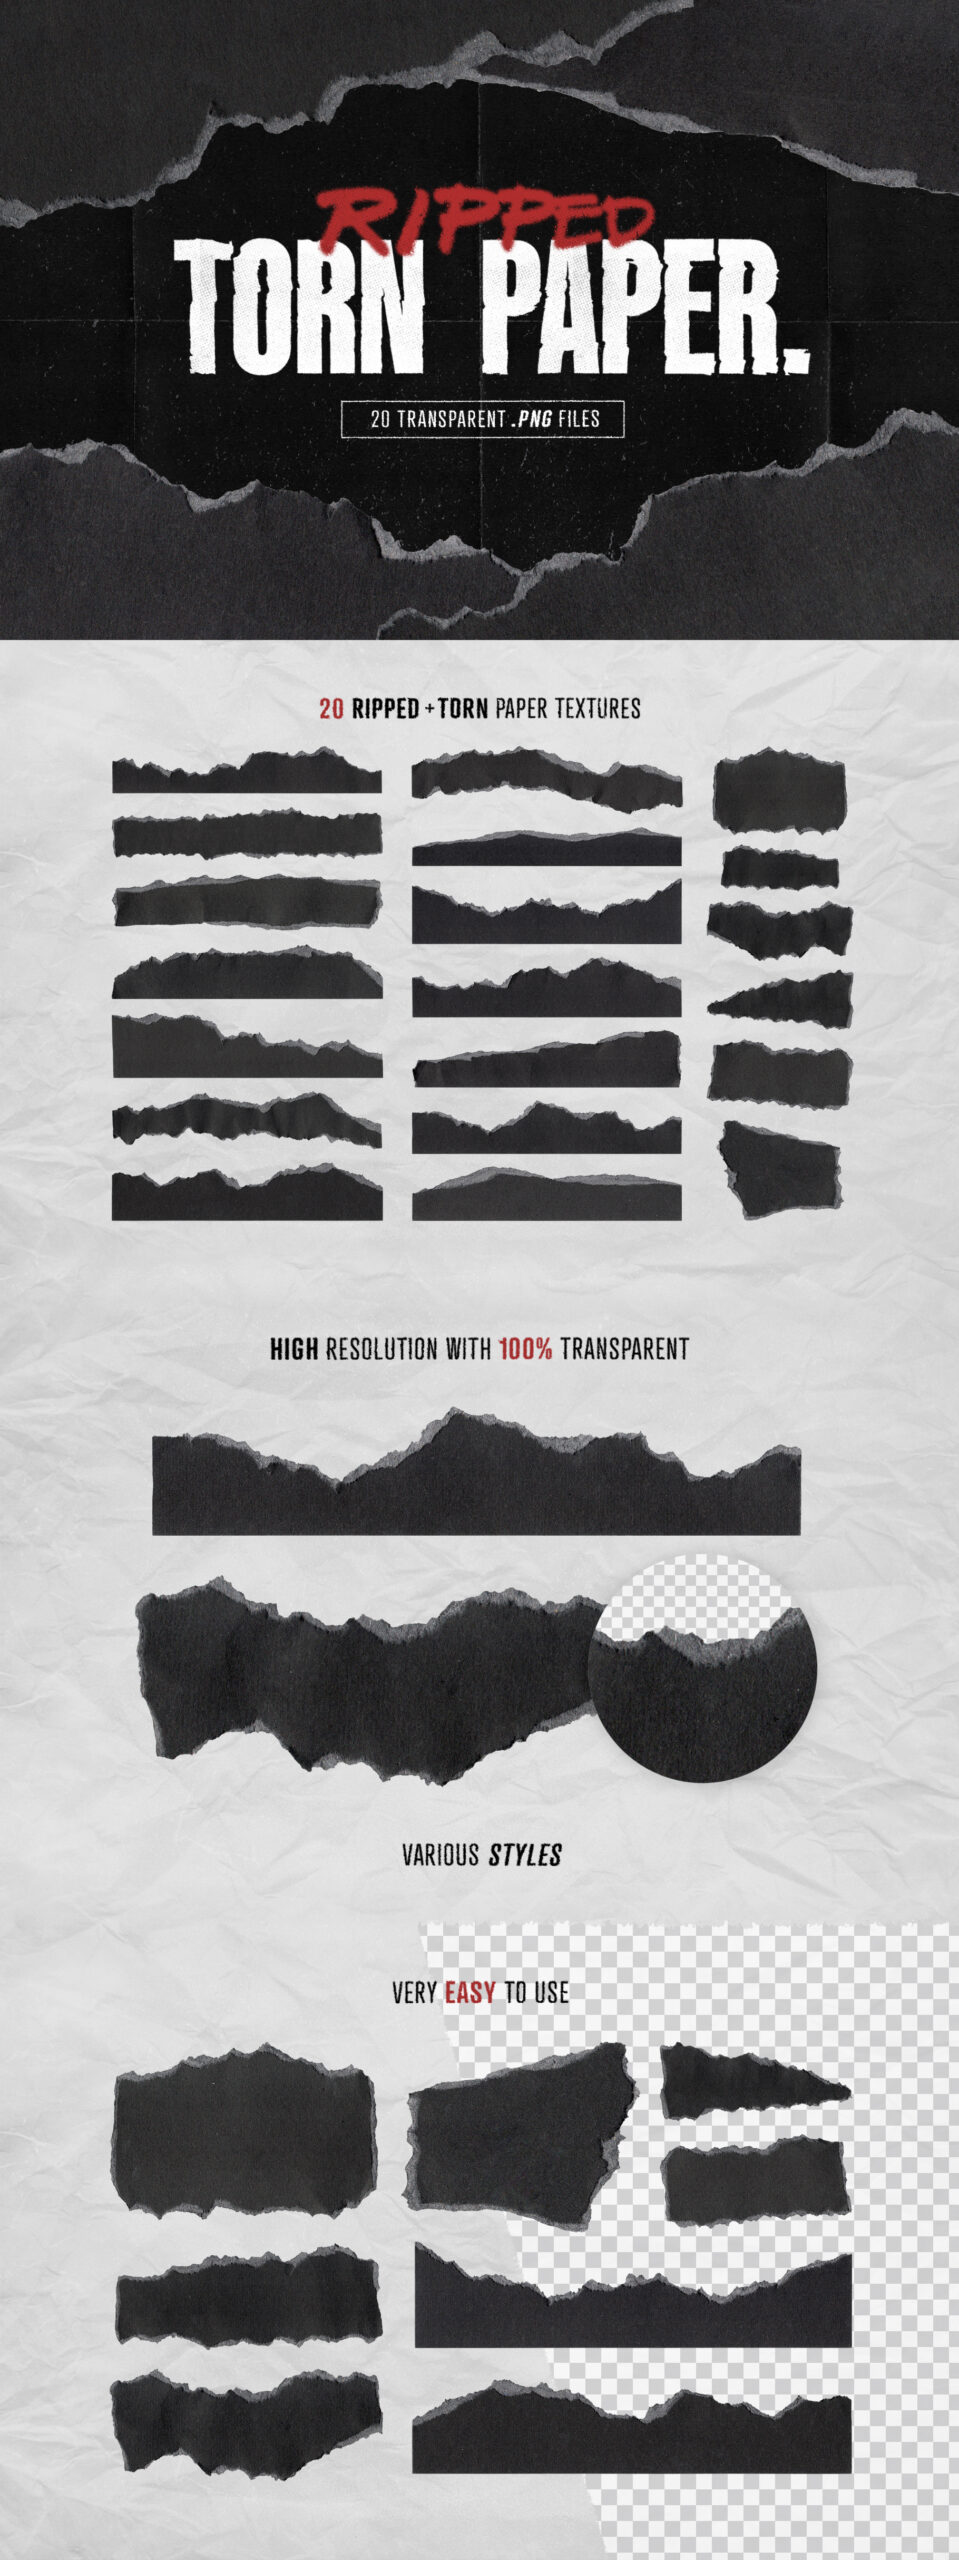 Black Torn Paper Texture Pack in PSD and PNG